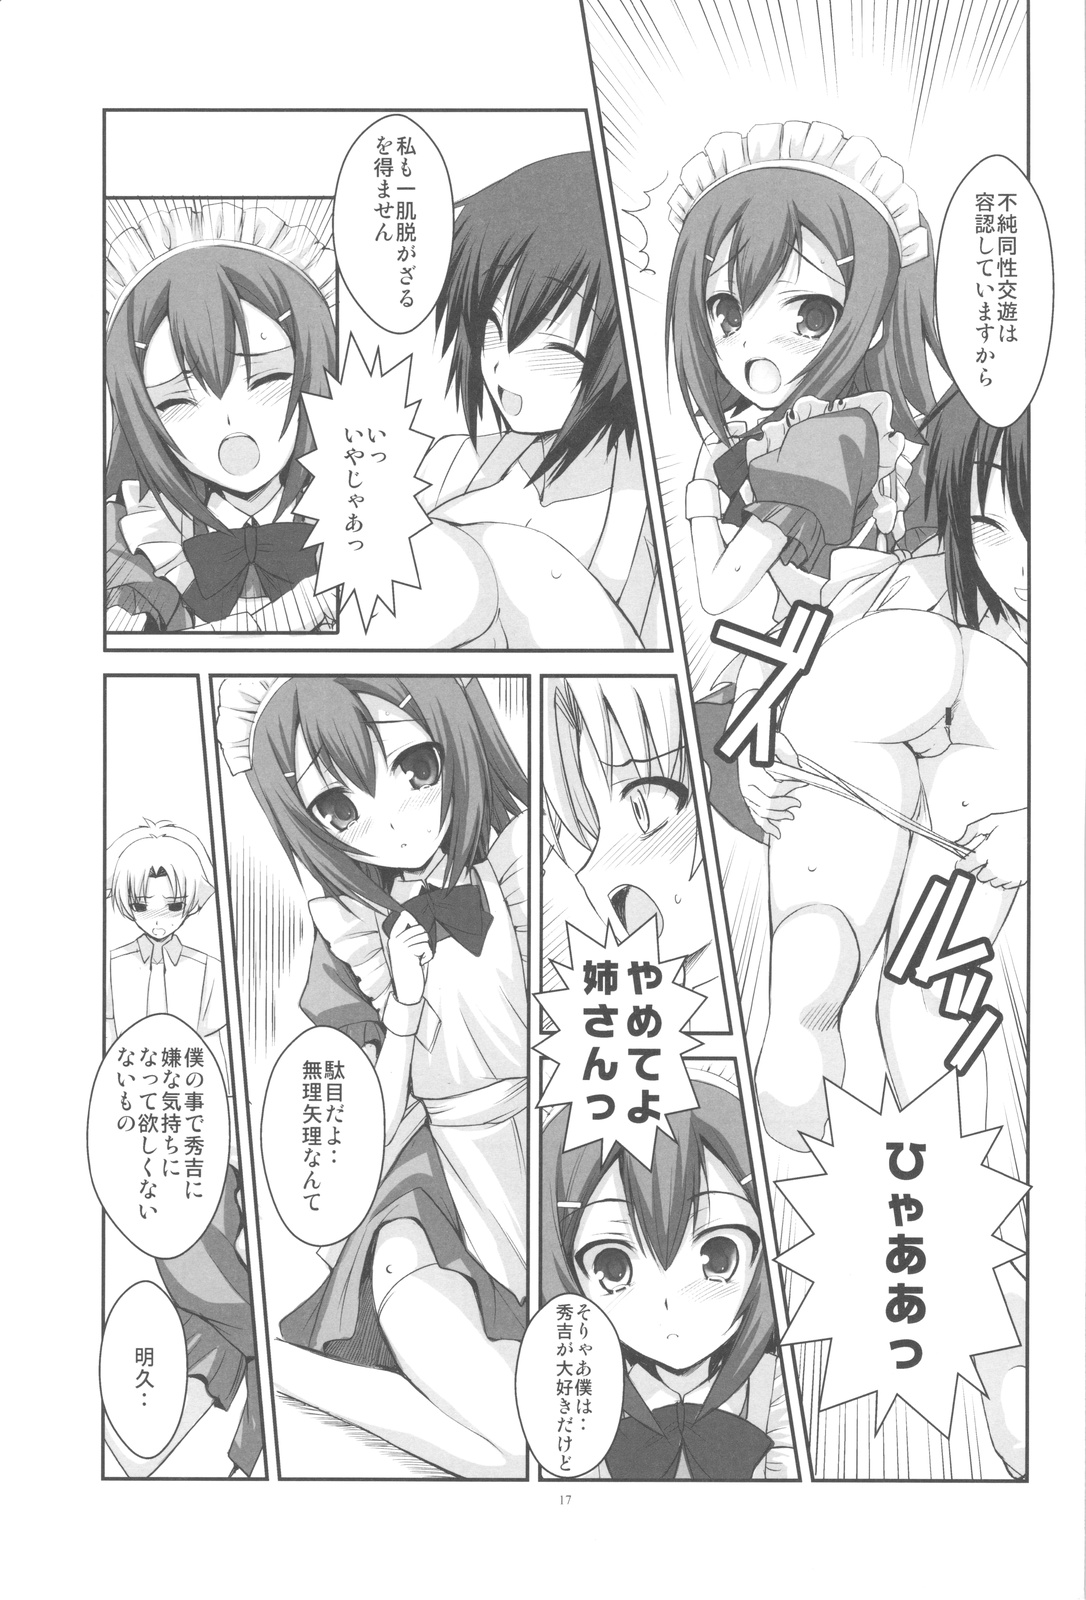 (COMIC1☆4) [R-WORKS] LOVE IS GAME OVER (Baka to Test to Shoukanjuu) page 17 full